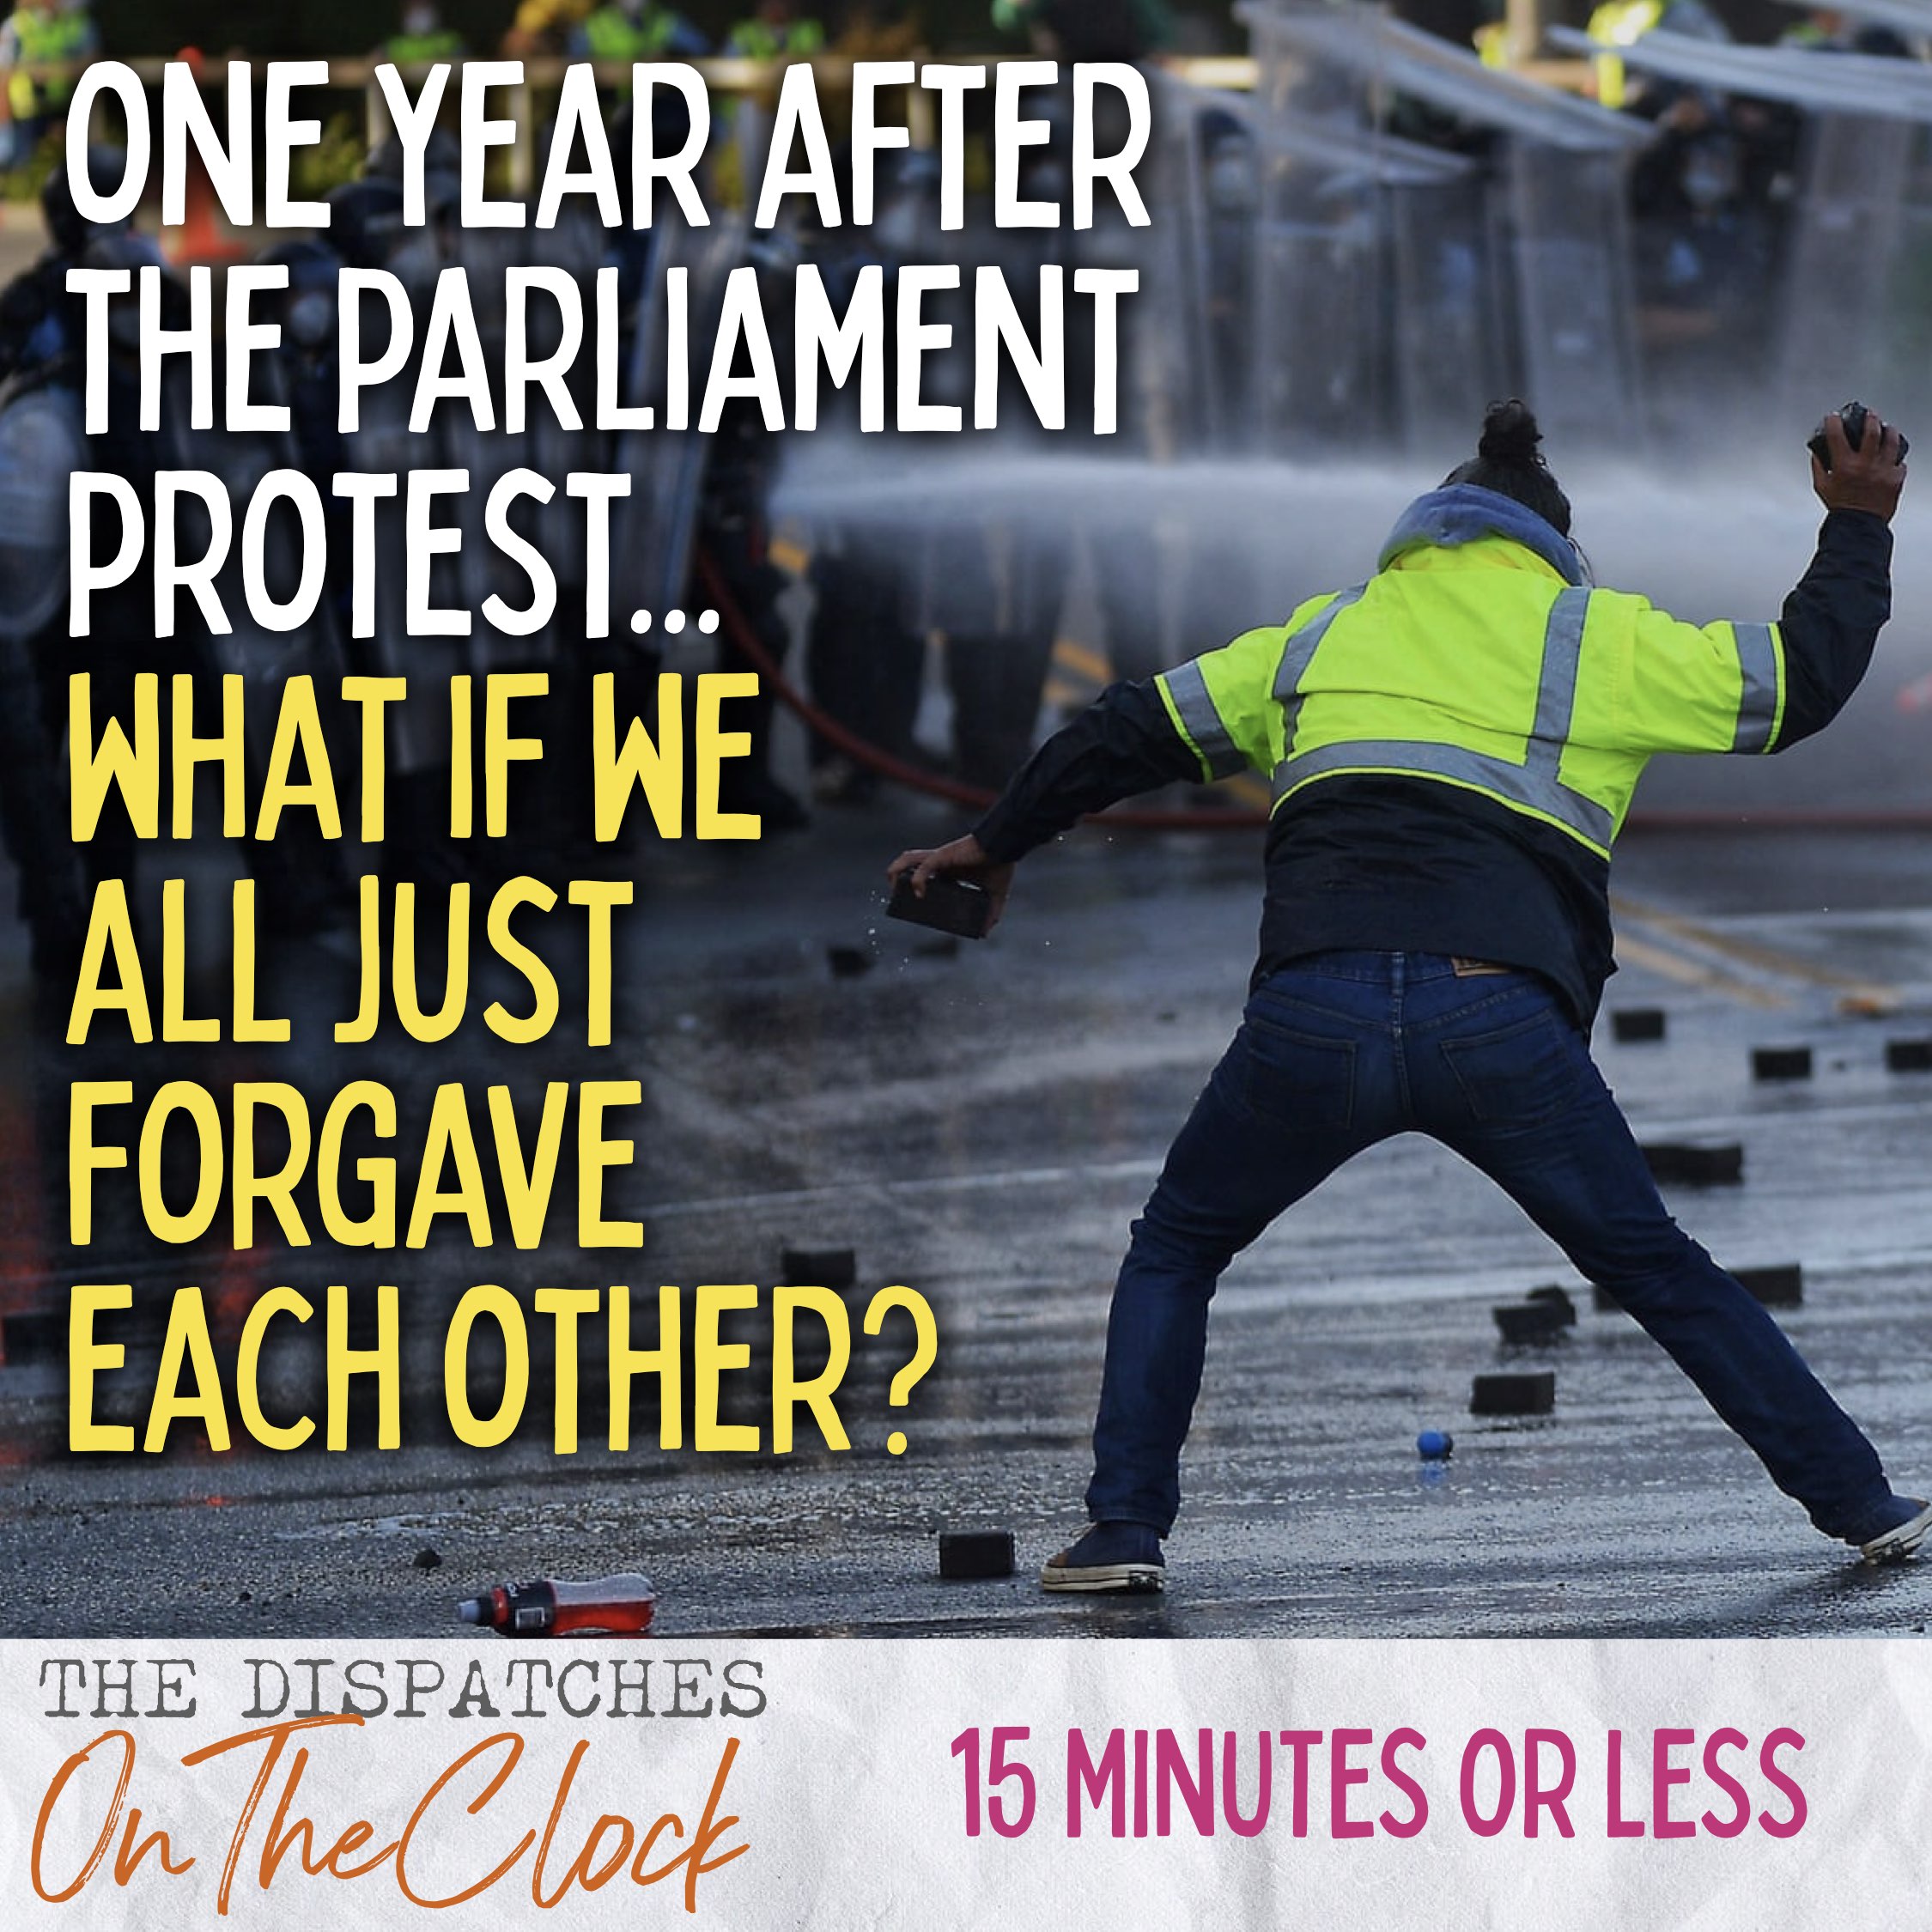 ON THE CLOCK | One Year After the Parliament Protest, What if we all Just Forgave Each Other?